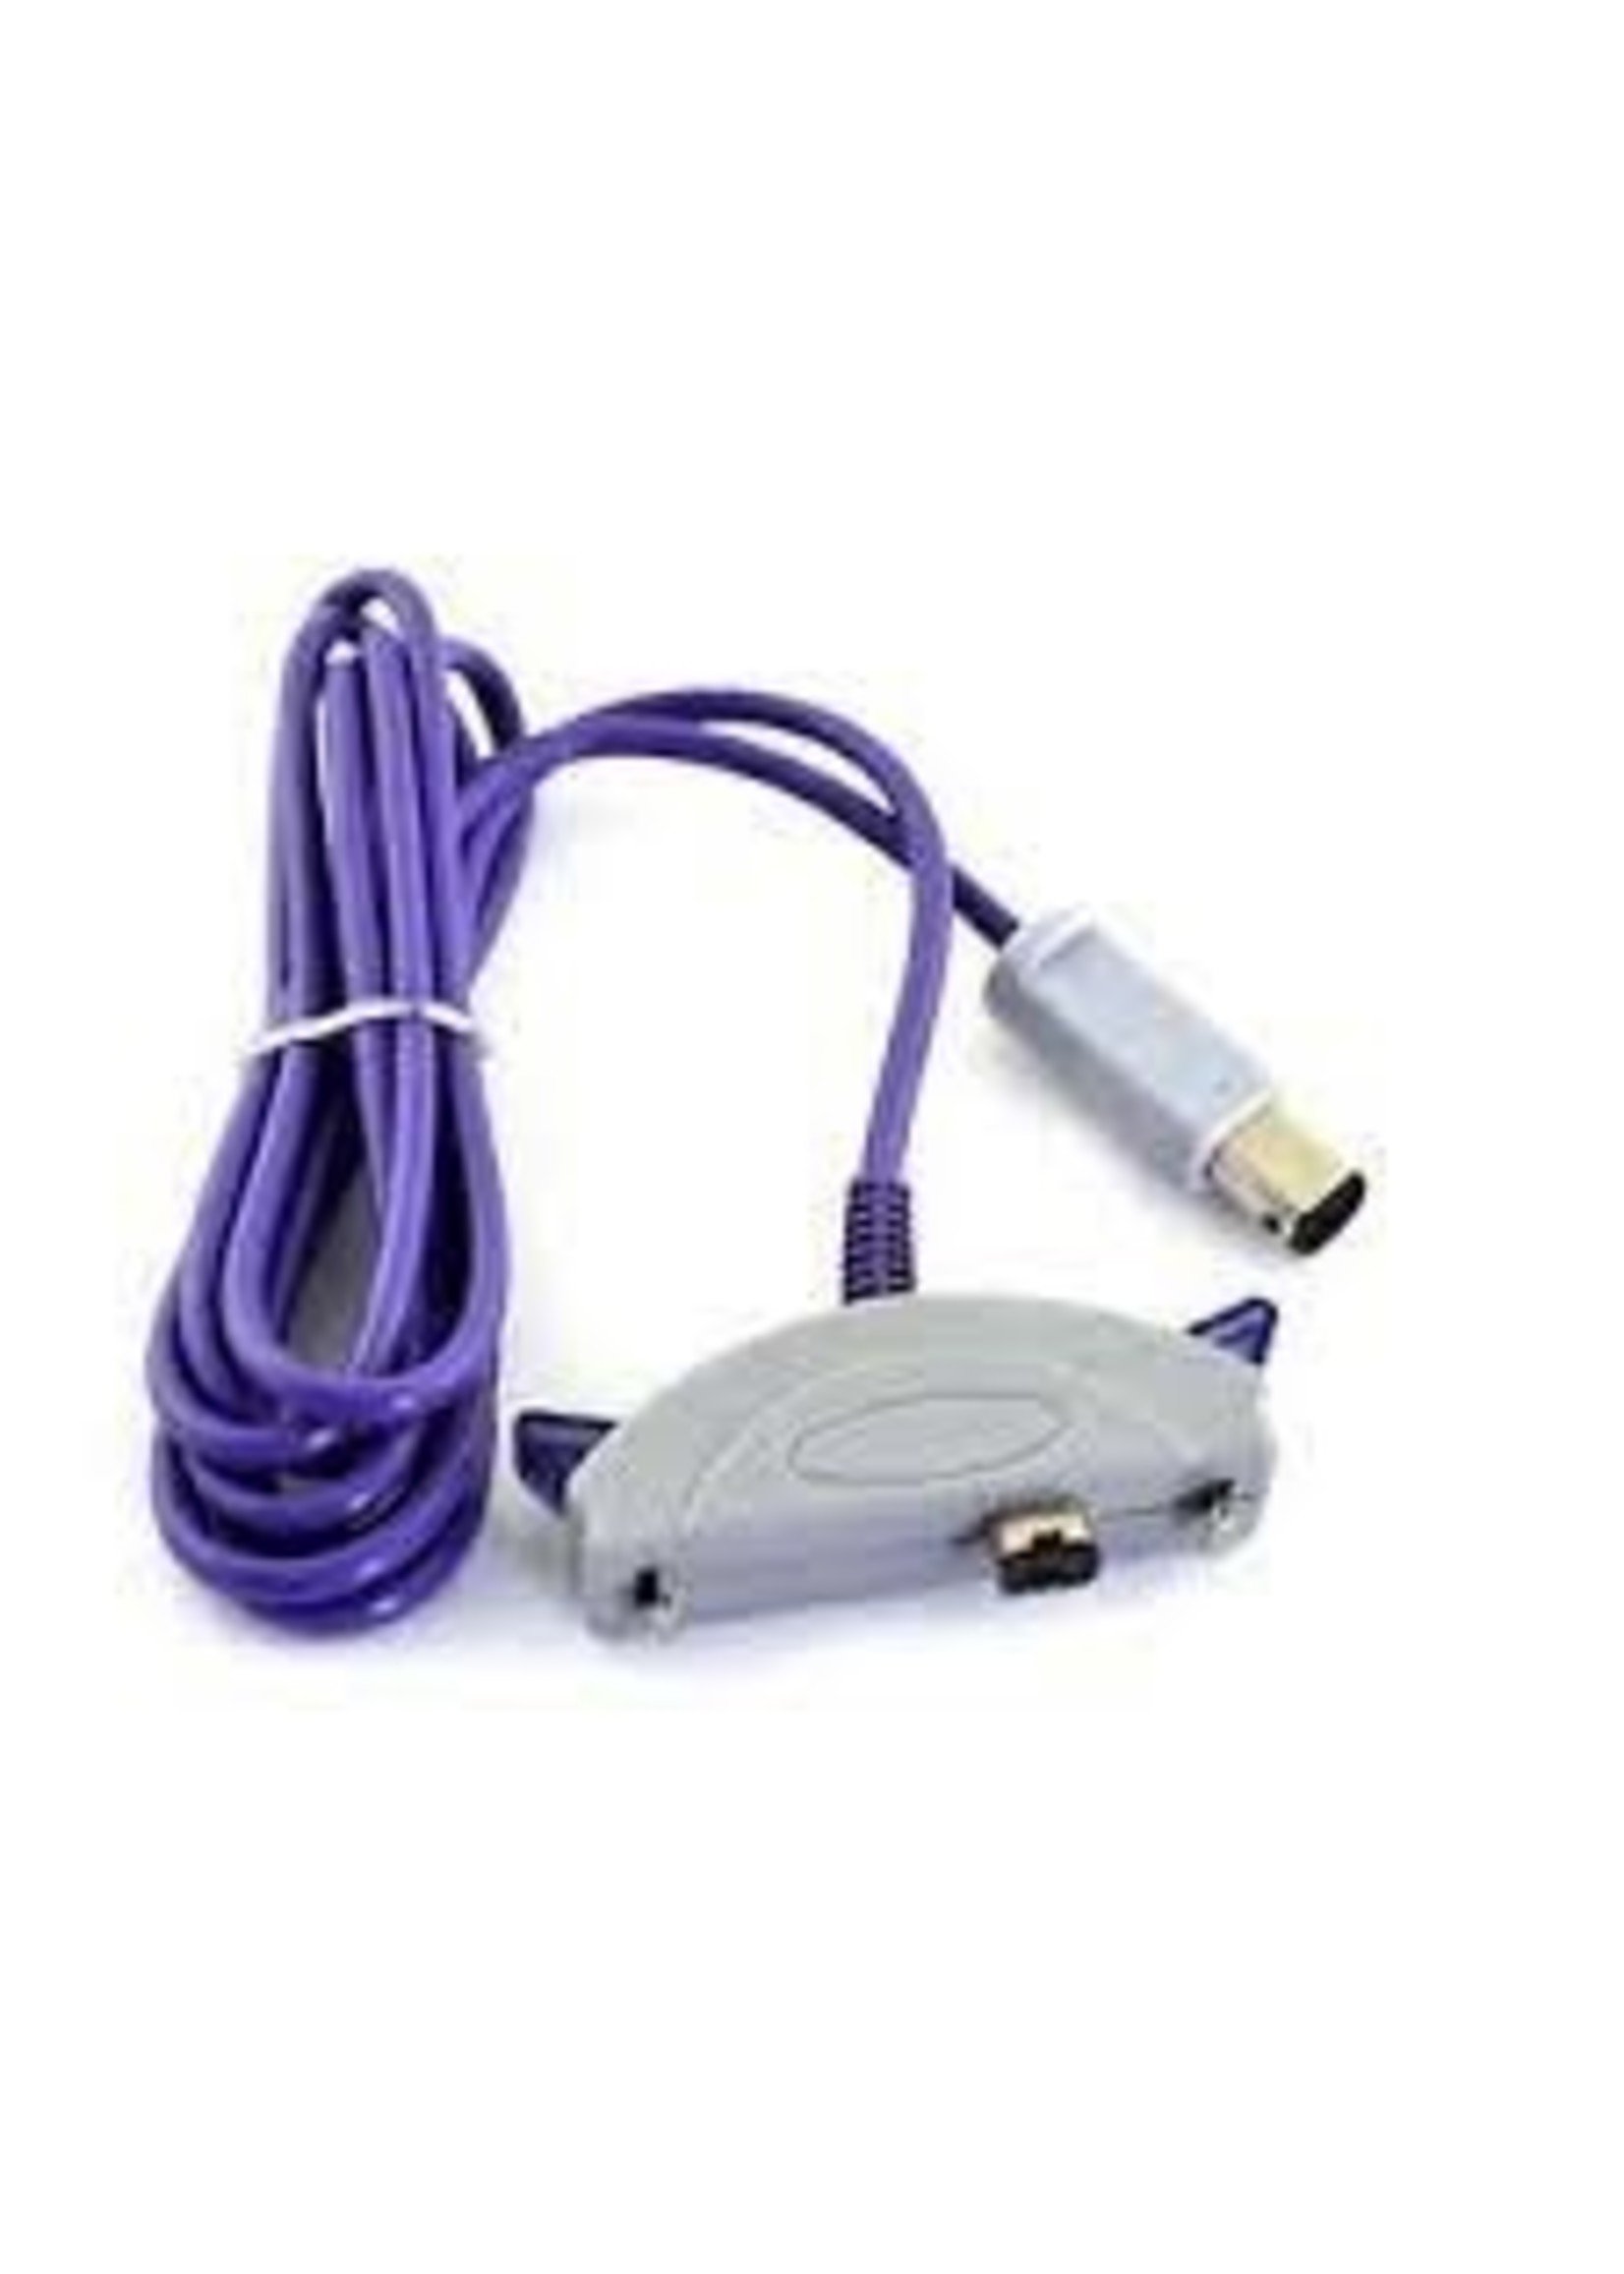 Nintendo Gameboy GBA to GC Adapter Cable (Used)